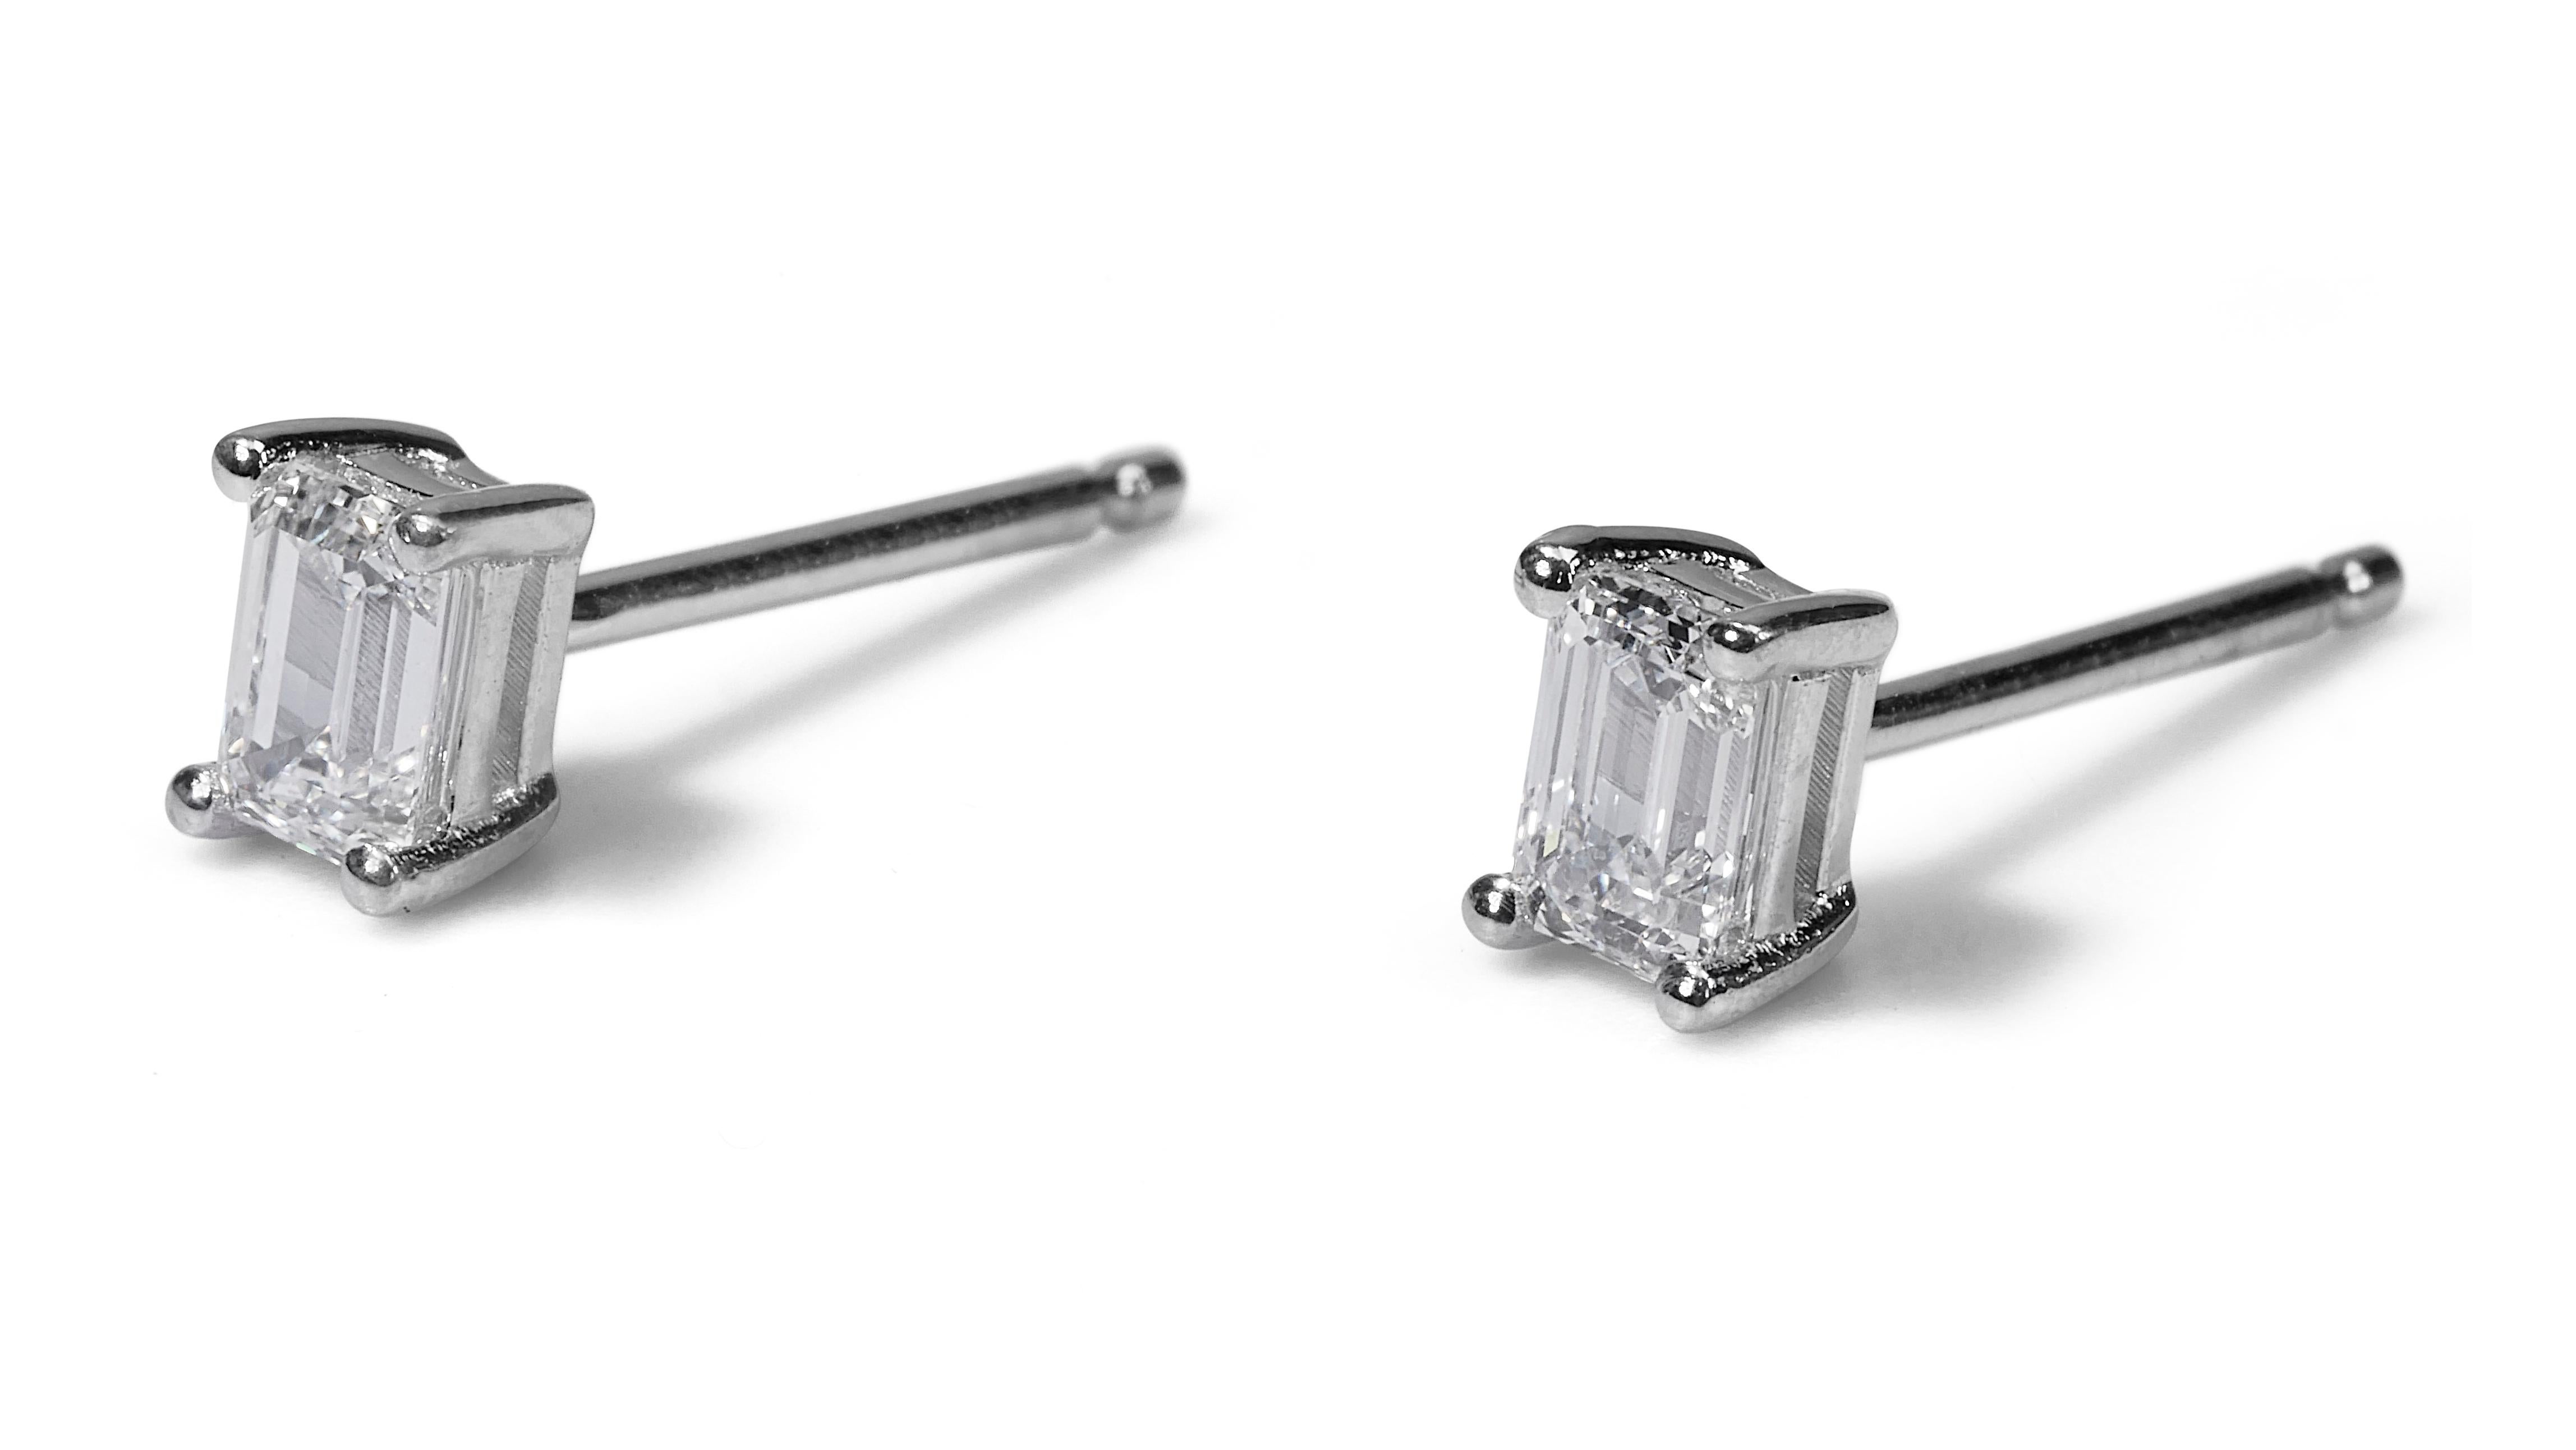 Classic 1.48ct Emerald-Cut Diamond Stud Earrings in 18k White Gold - GIA  For Sale 3